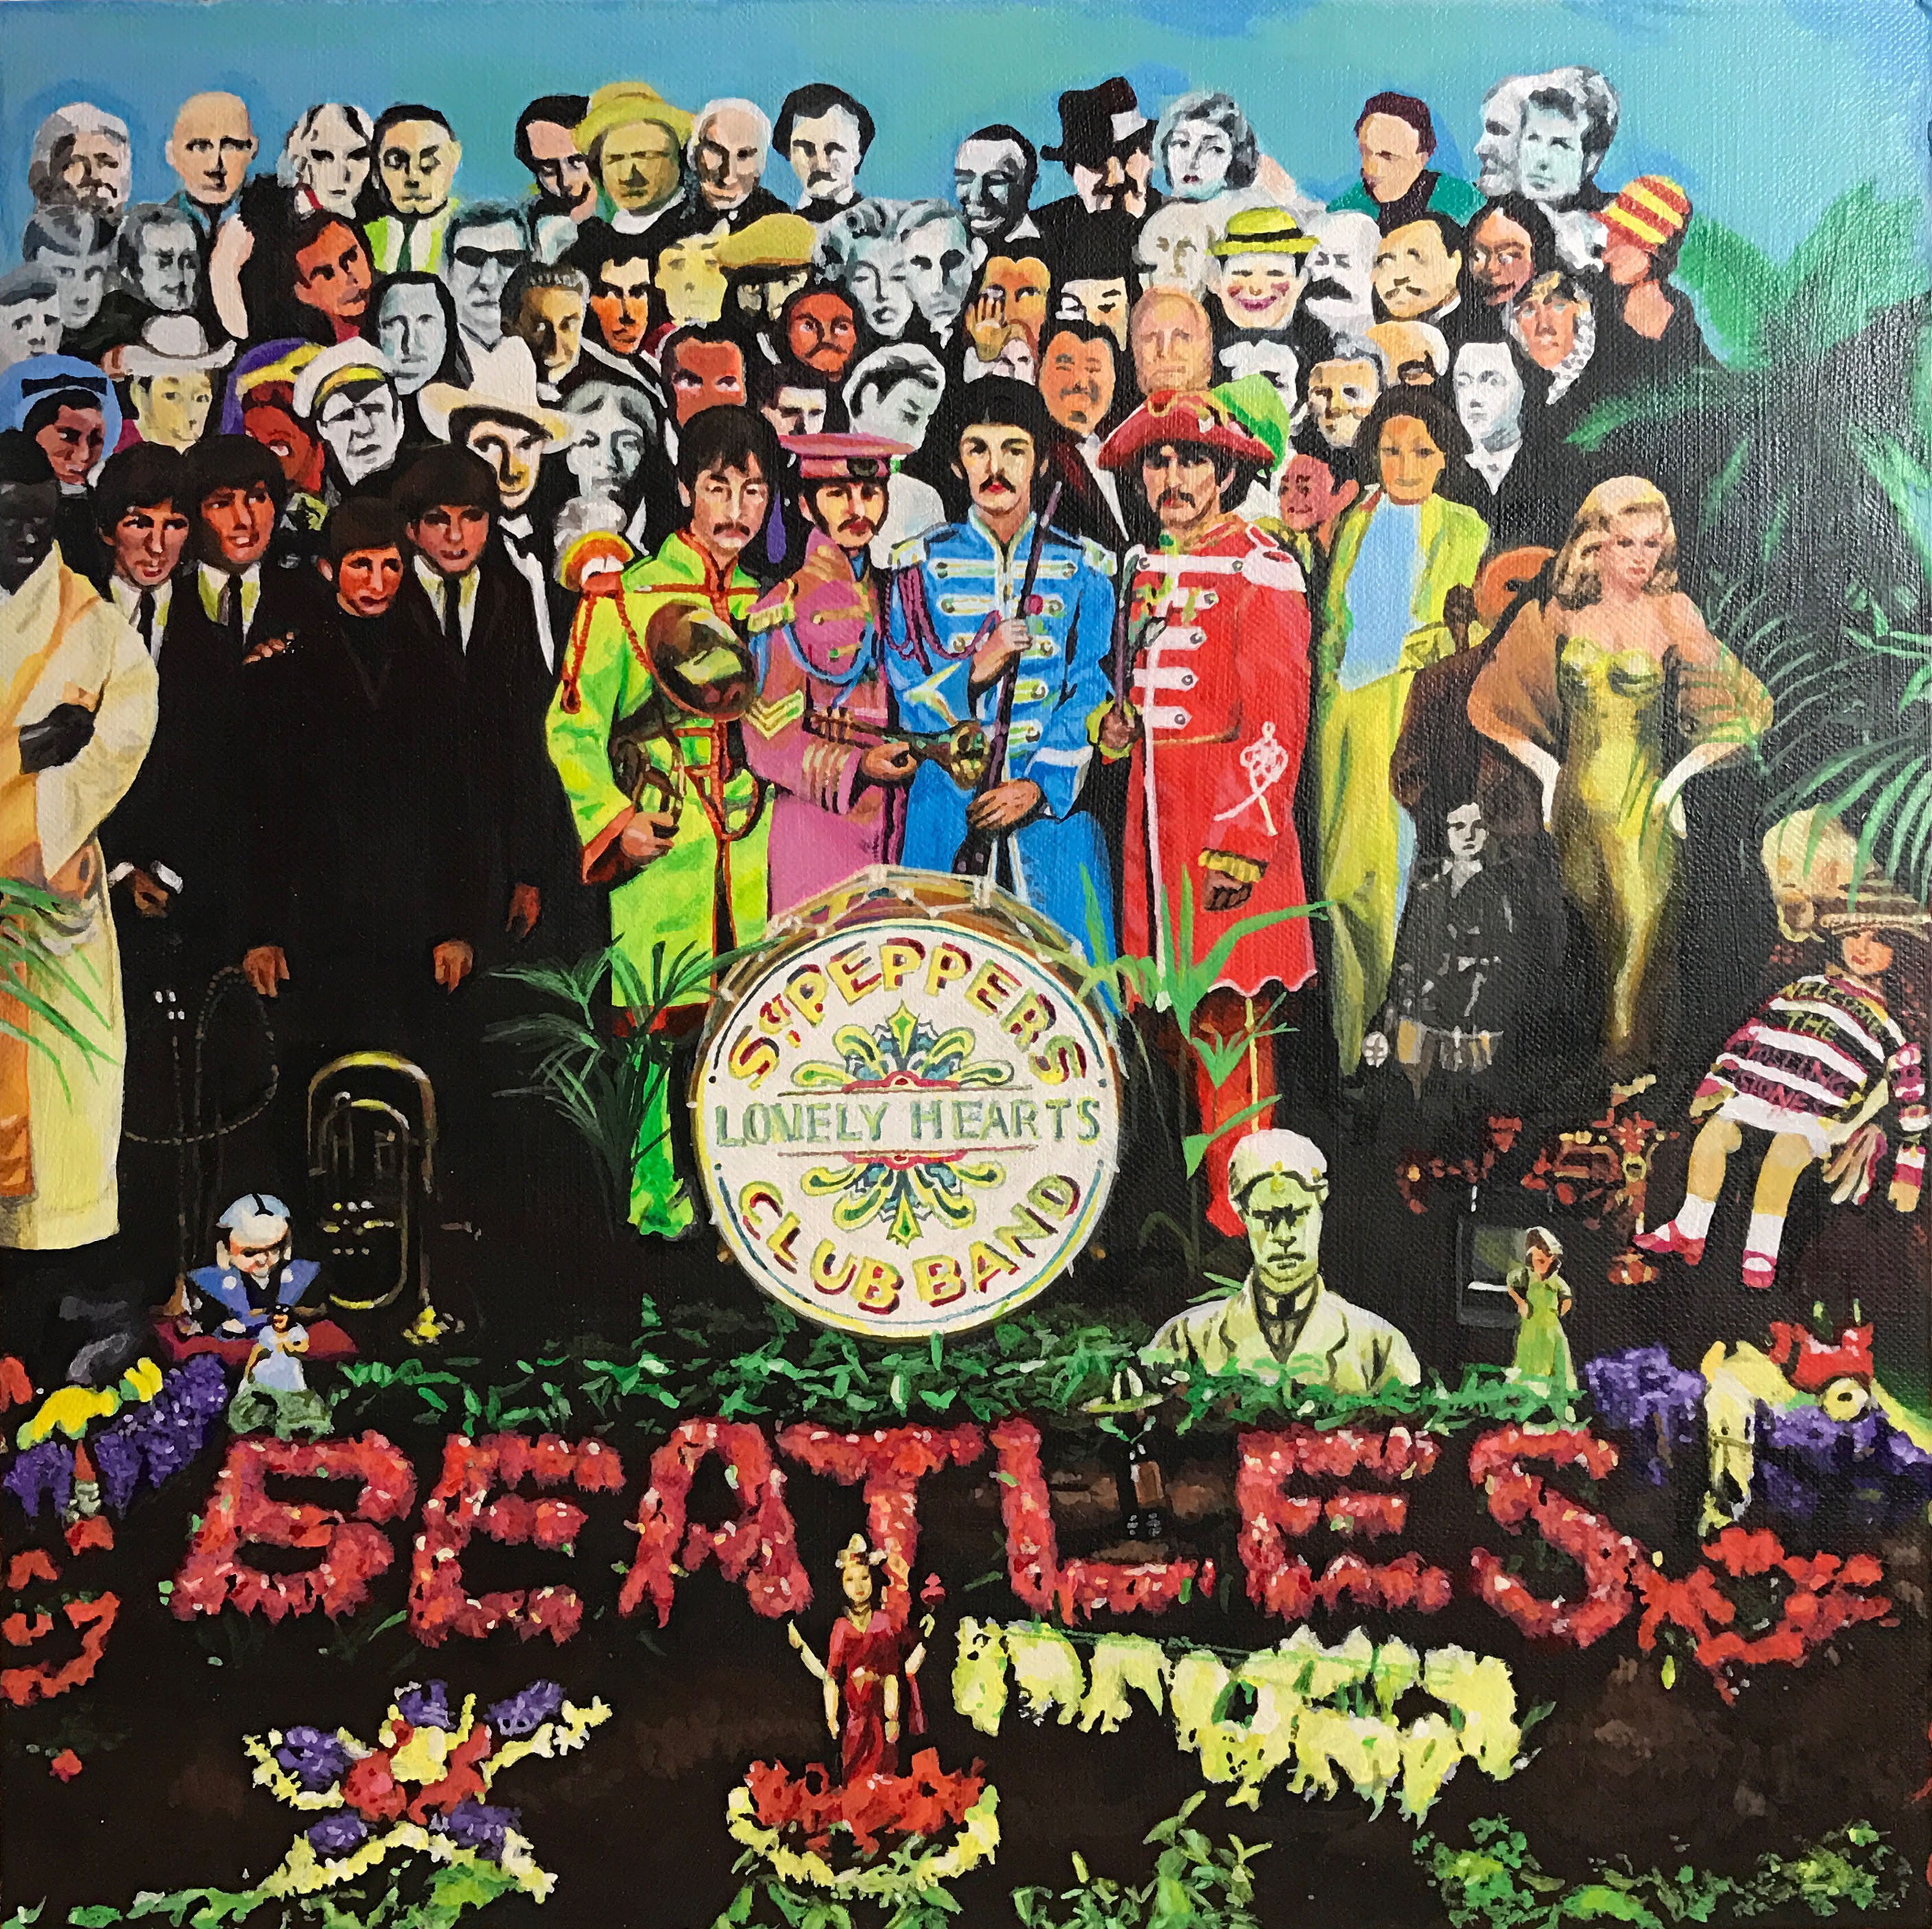 Sgt. Pepper's Lonely Hearts Club Band (Painting)